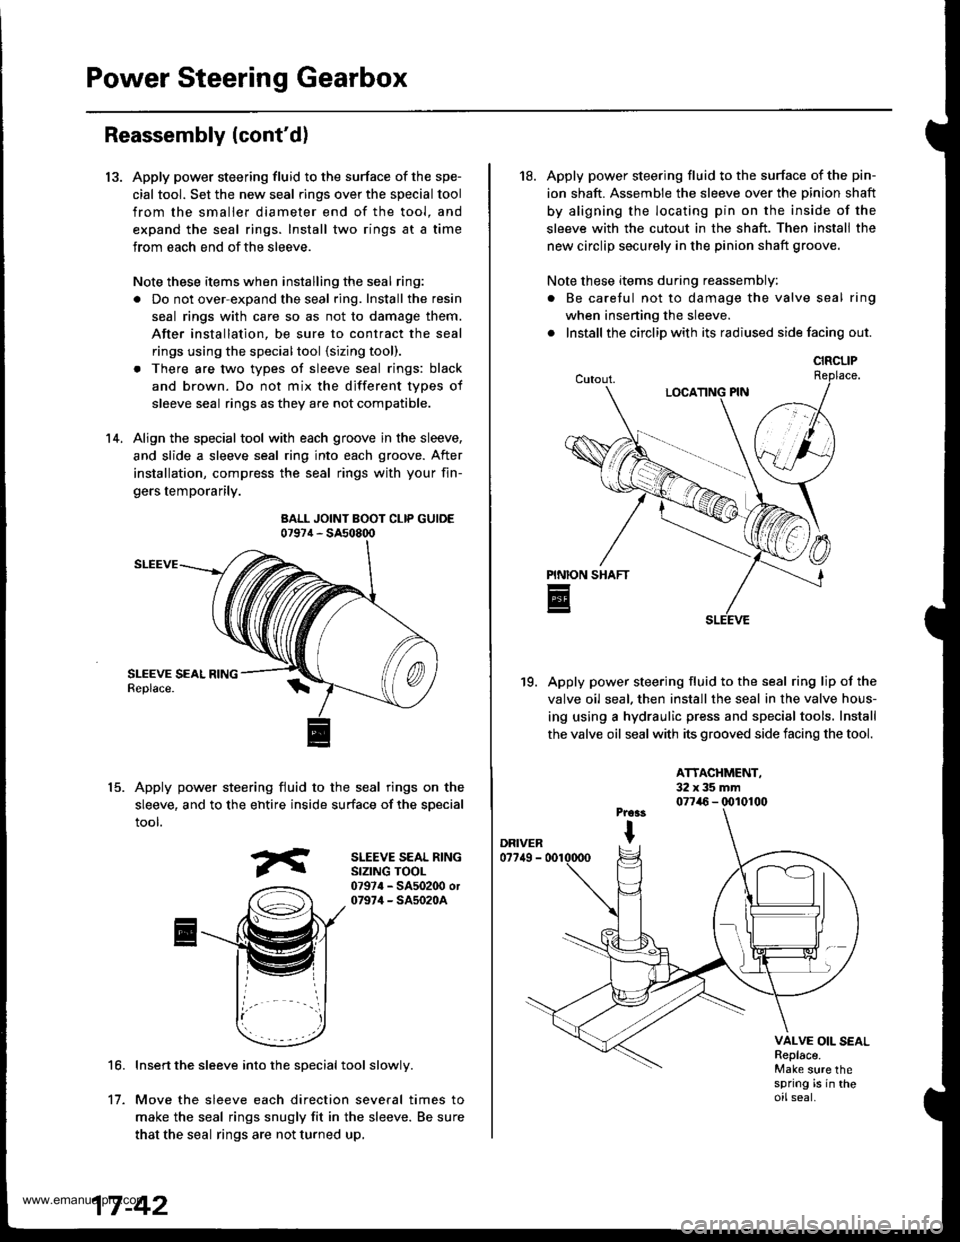 HONDA CR-V 1998 RD1-RD3 / 1.G Workshop Manual 
Power Steering Gearbox
13.
Reassembly (contd)
Apply power steering fluid to the surface of the spe-
cial tool. Set the new seal rings over the special tool
from the smaller diameter end of the tool.